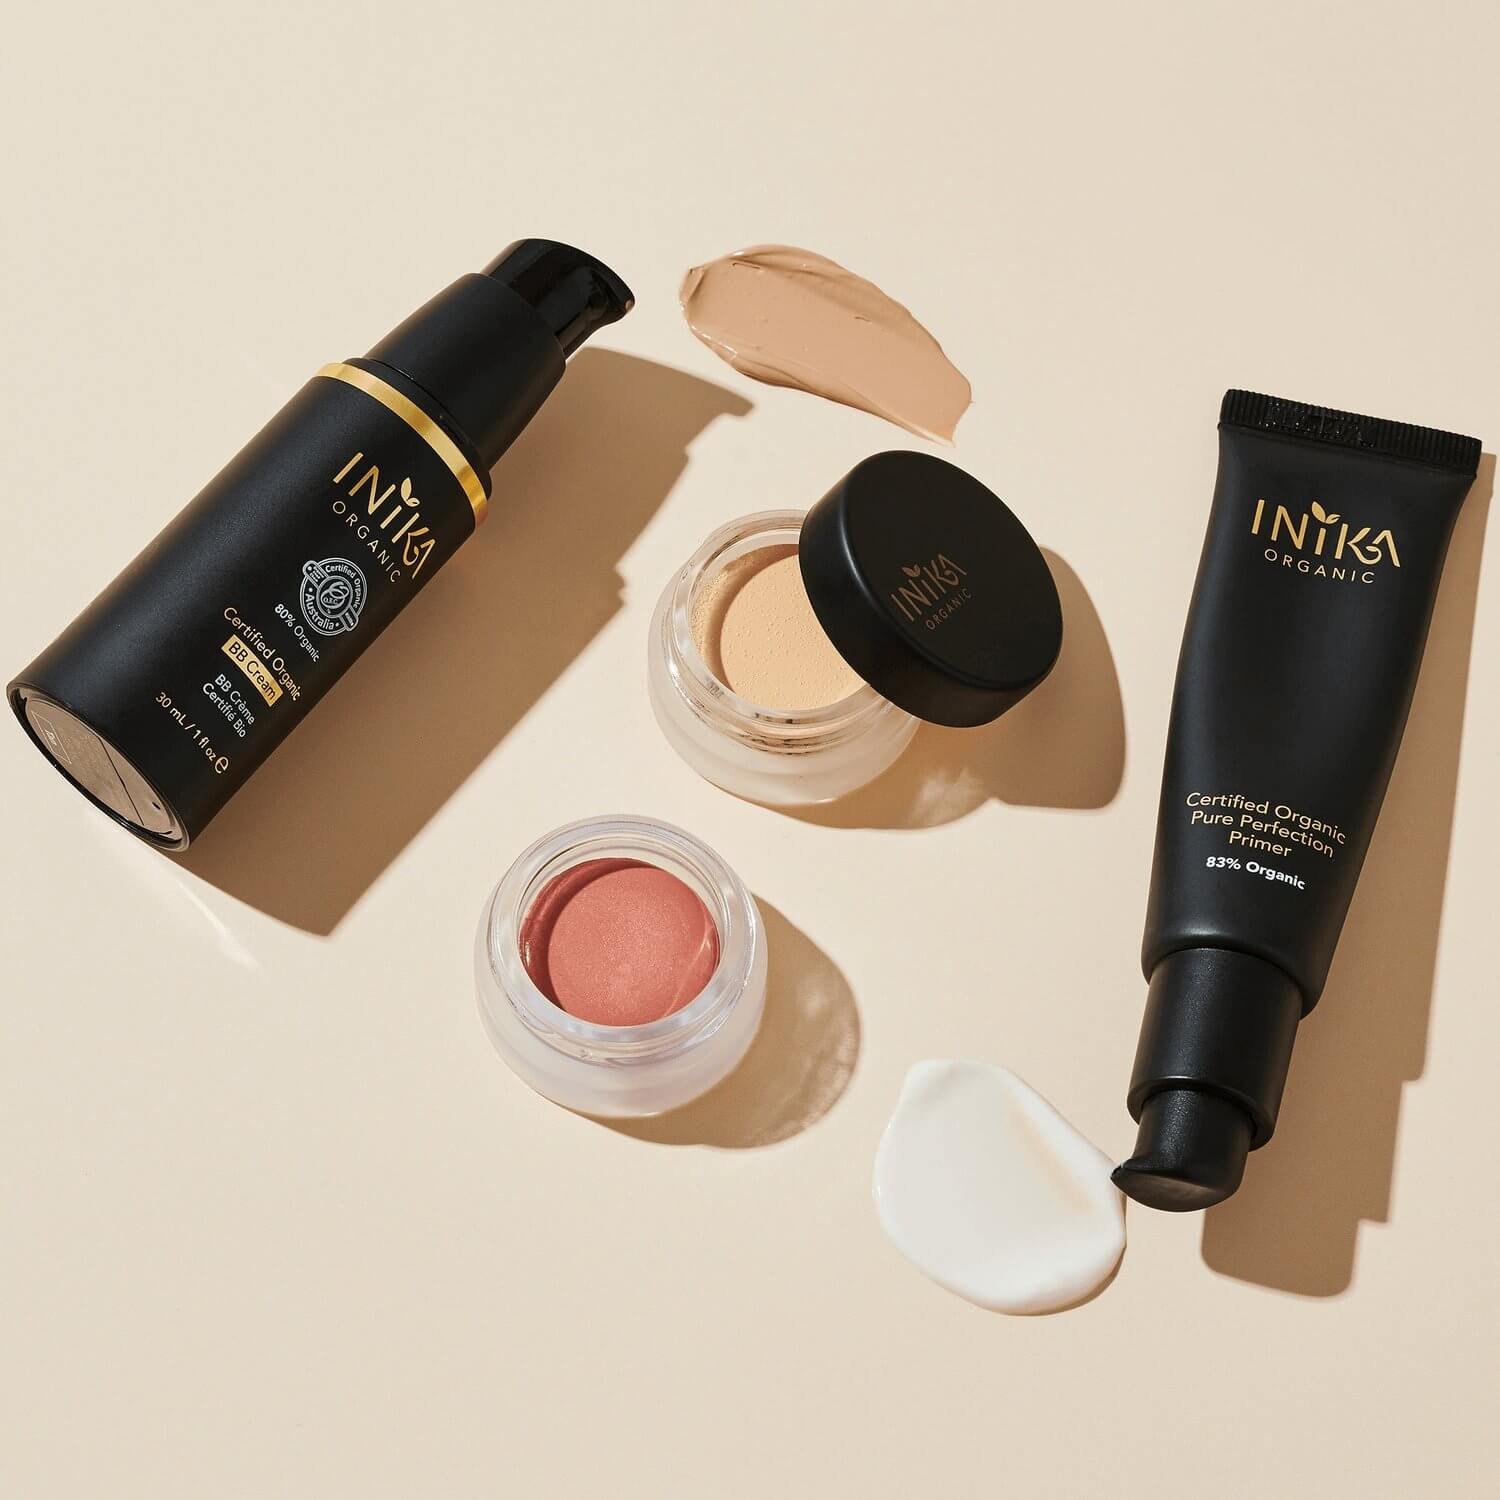 haj gullig Geografi The 6 Best Organic & Non-Toxic Makeup Brands for Clean Beauty — The Honest  Consumer